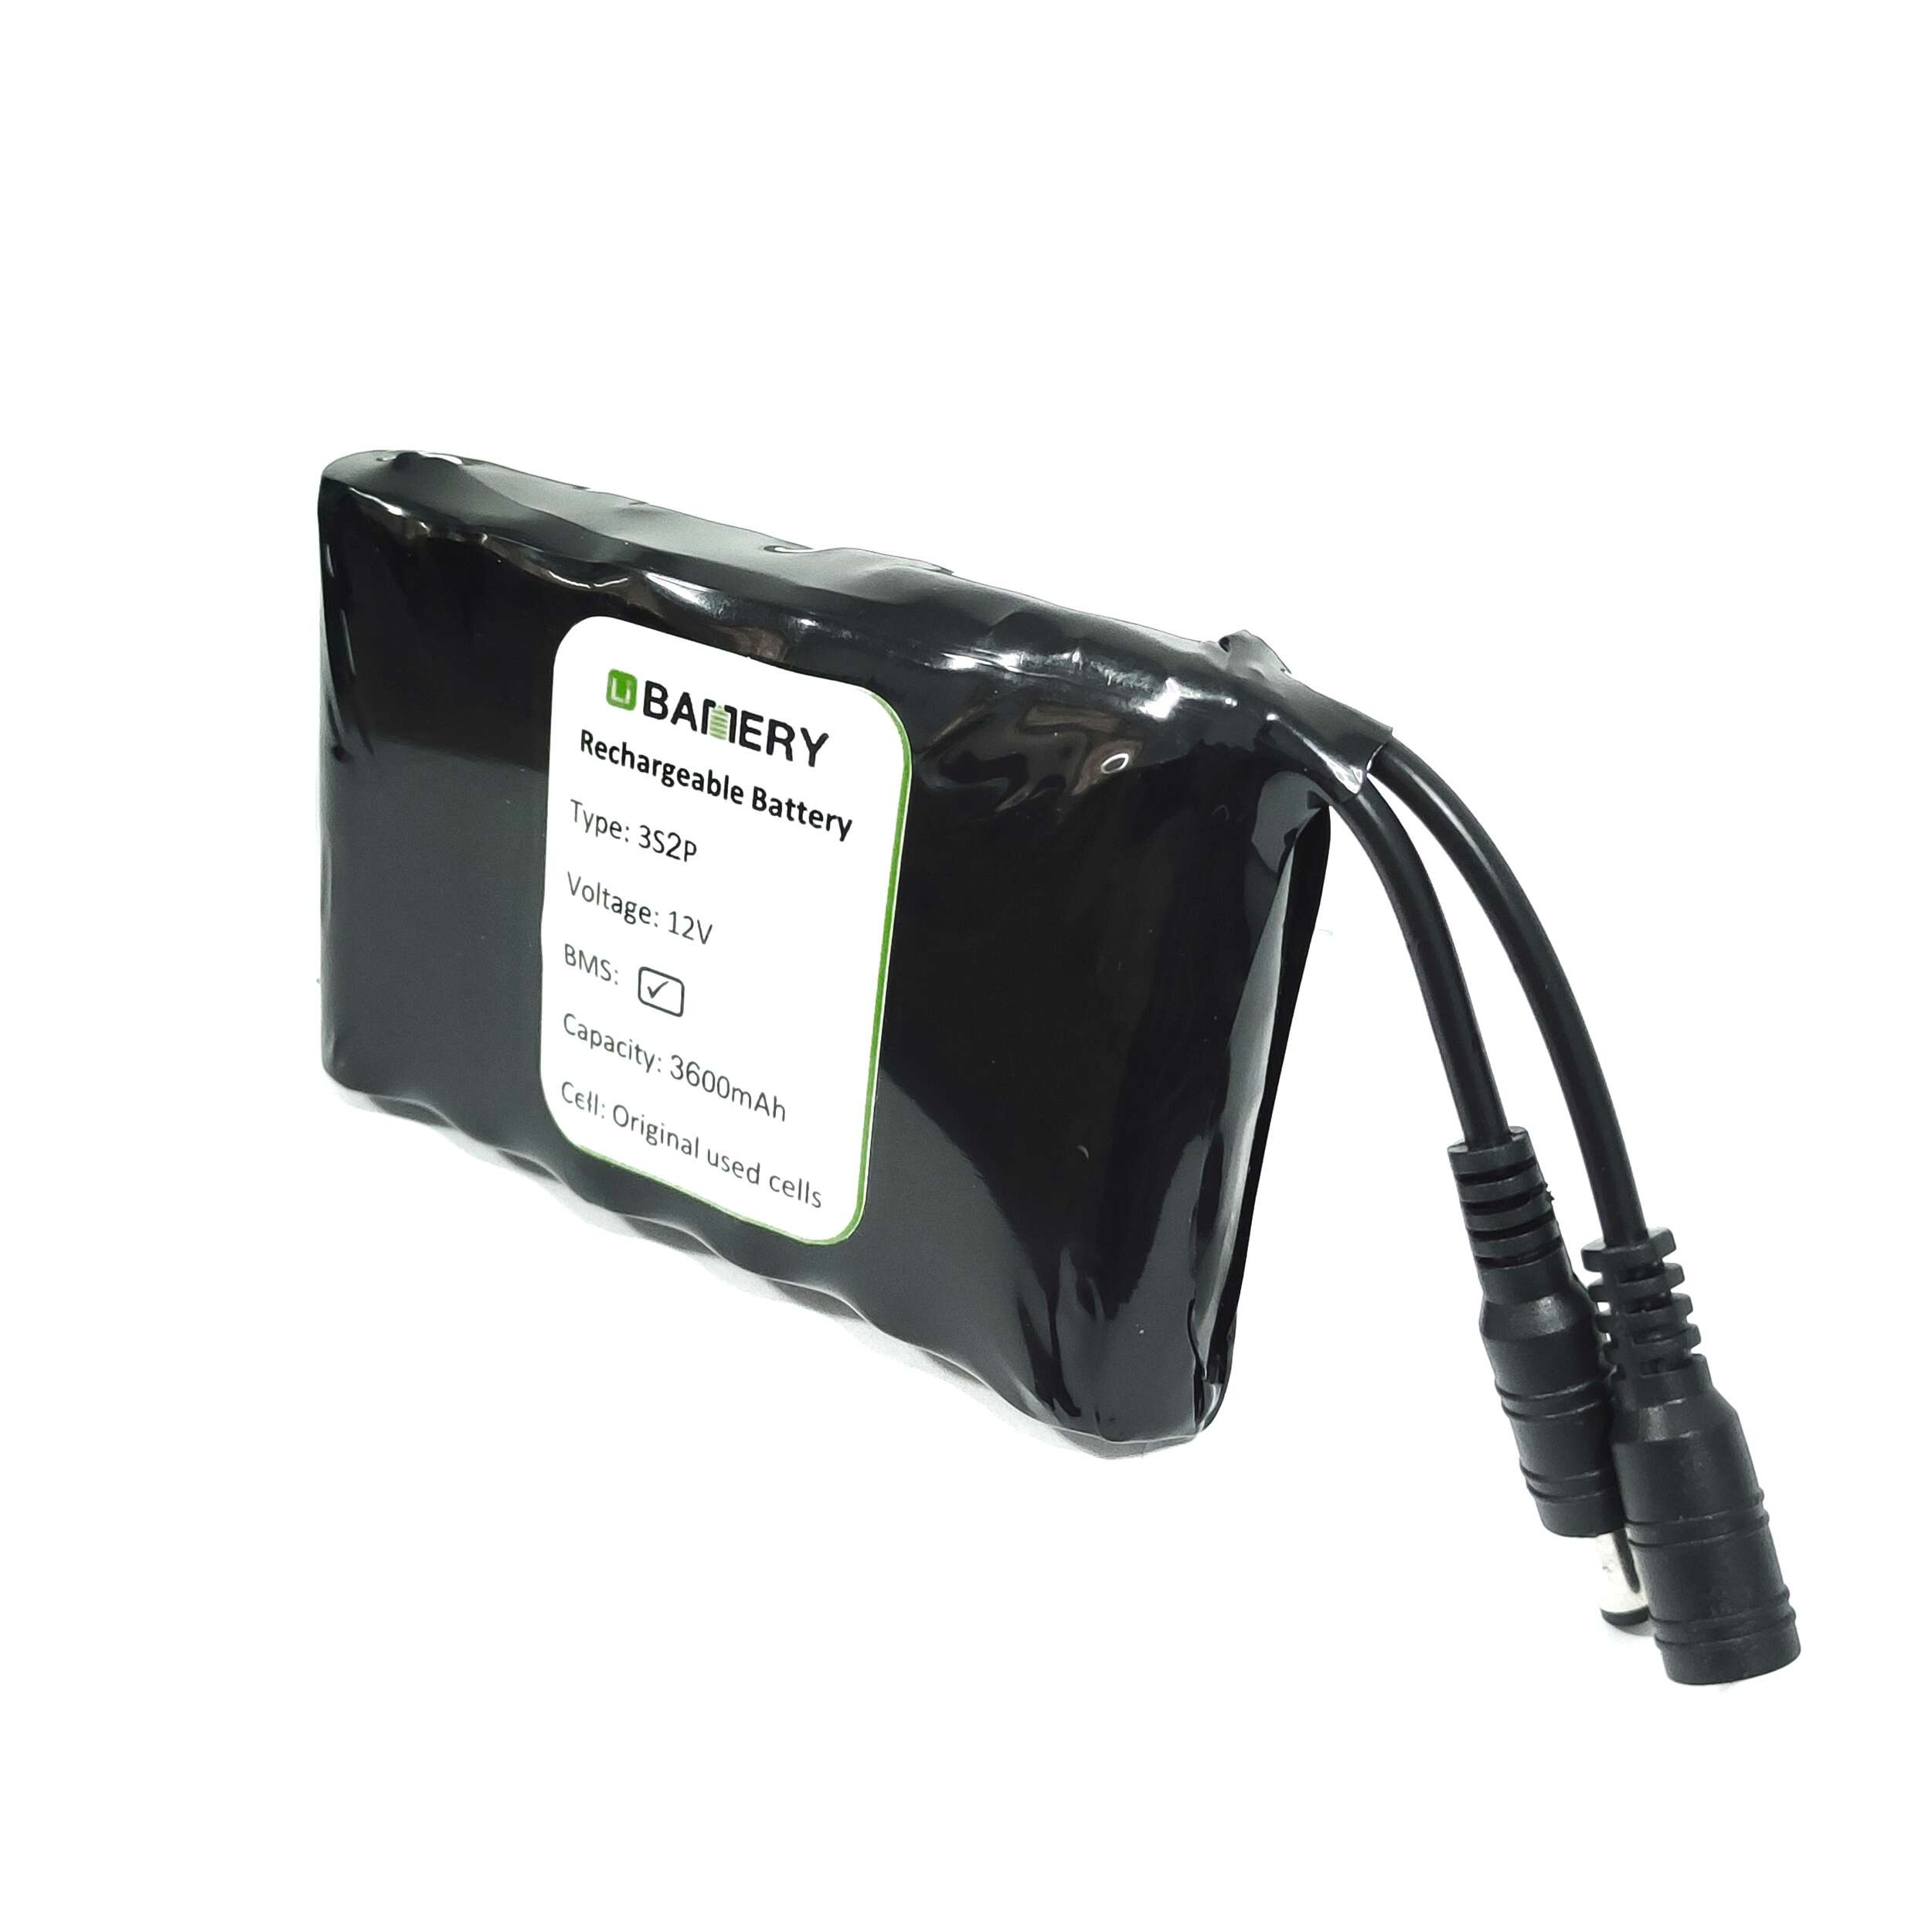 12V 3600mAh Battery Pack with 1 year warranty - BMS Included